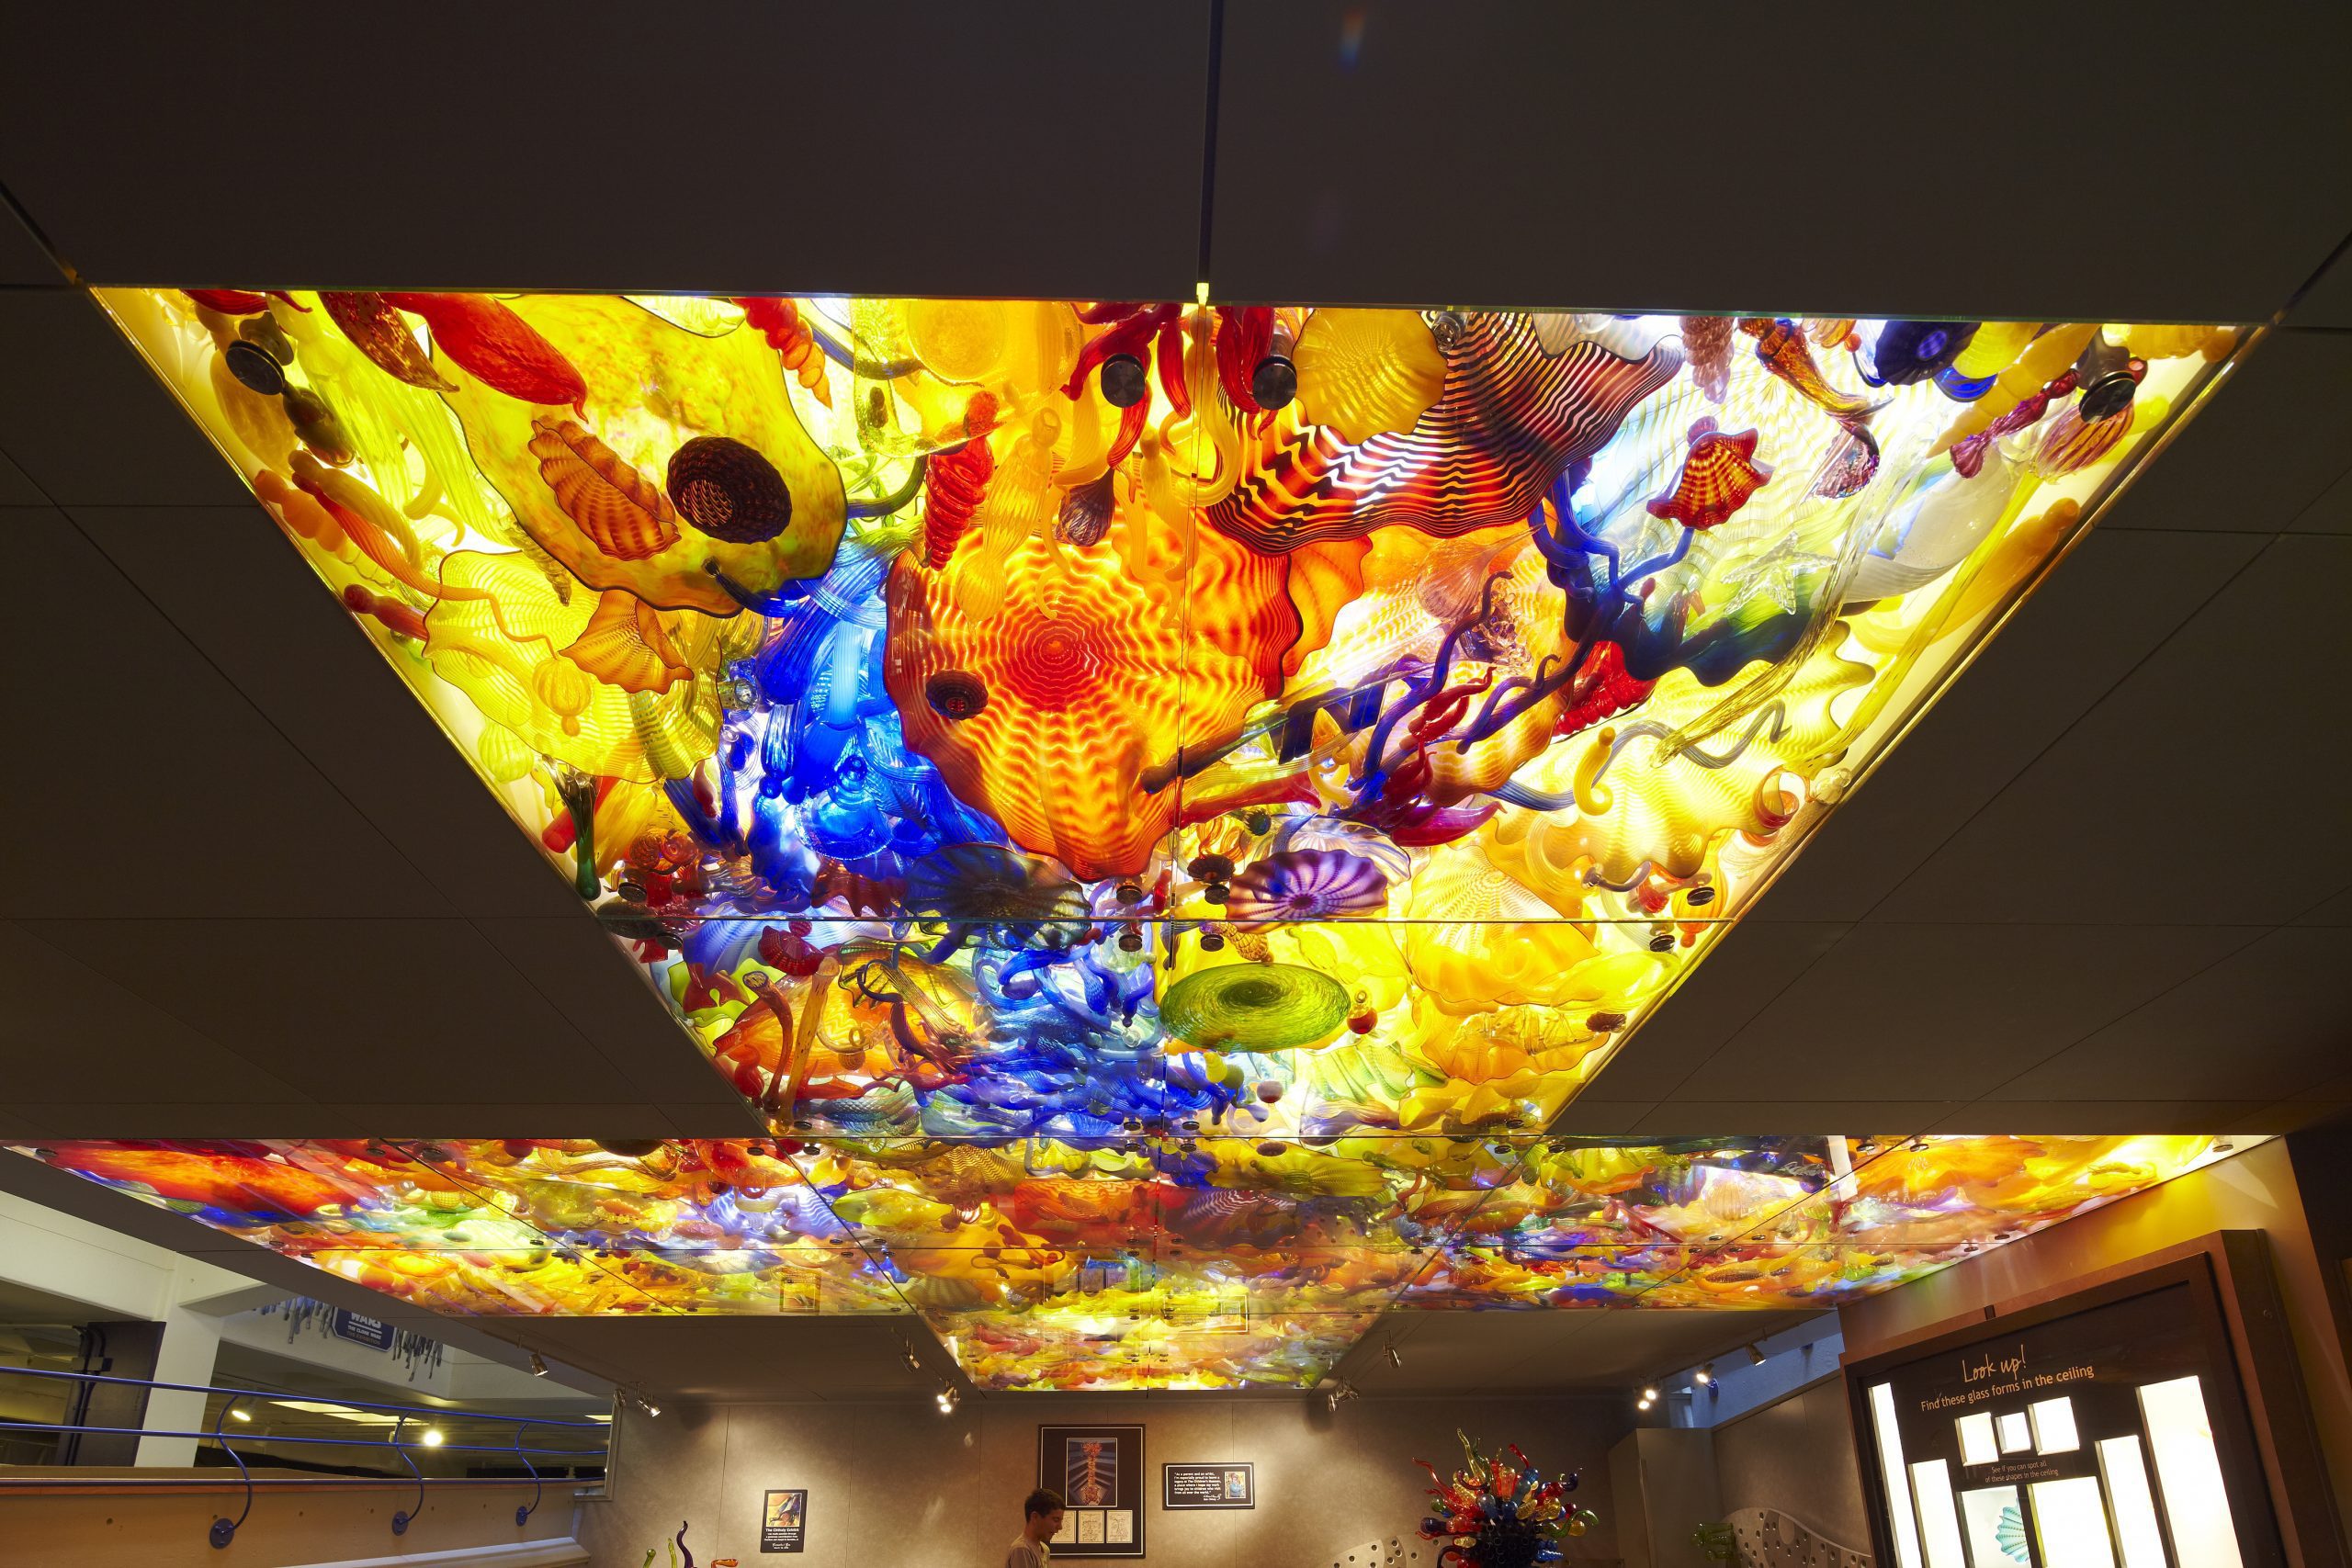 The Children's Museum of Indianapolis: Chihuly Sculpture Platform